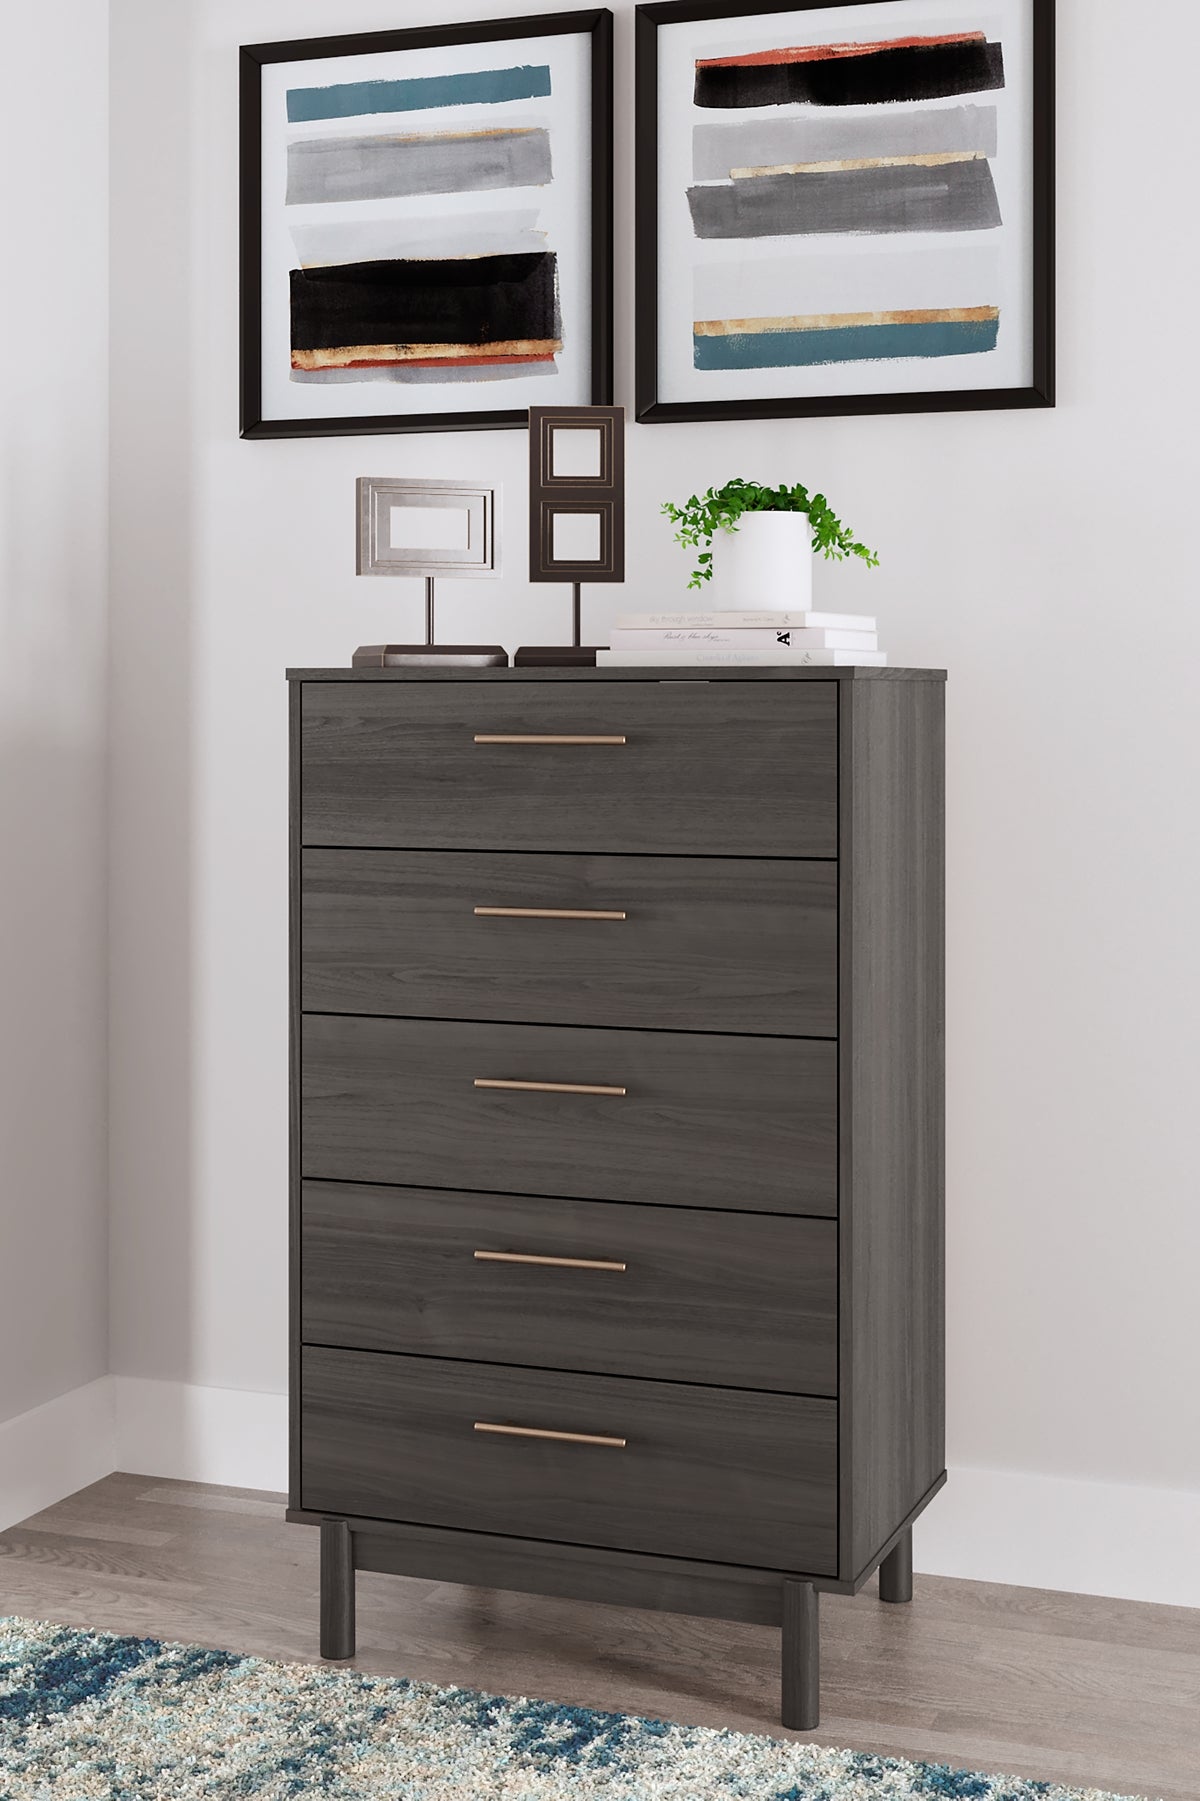 Ashley Express - Brymont Five Drawer Chest